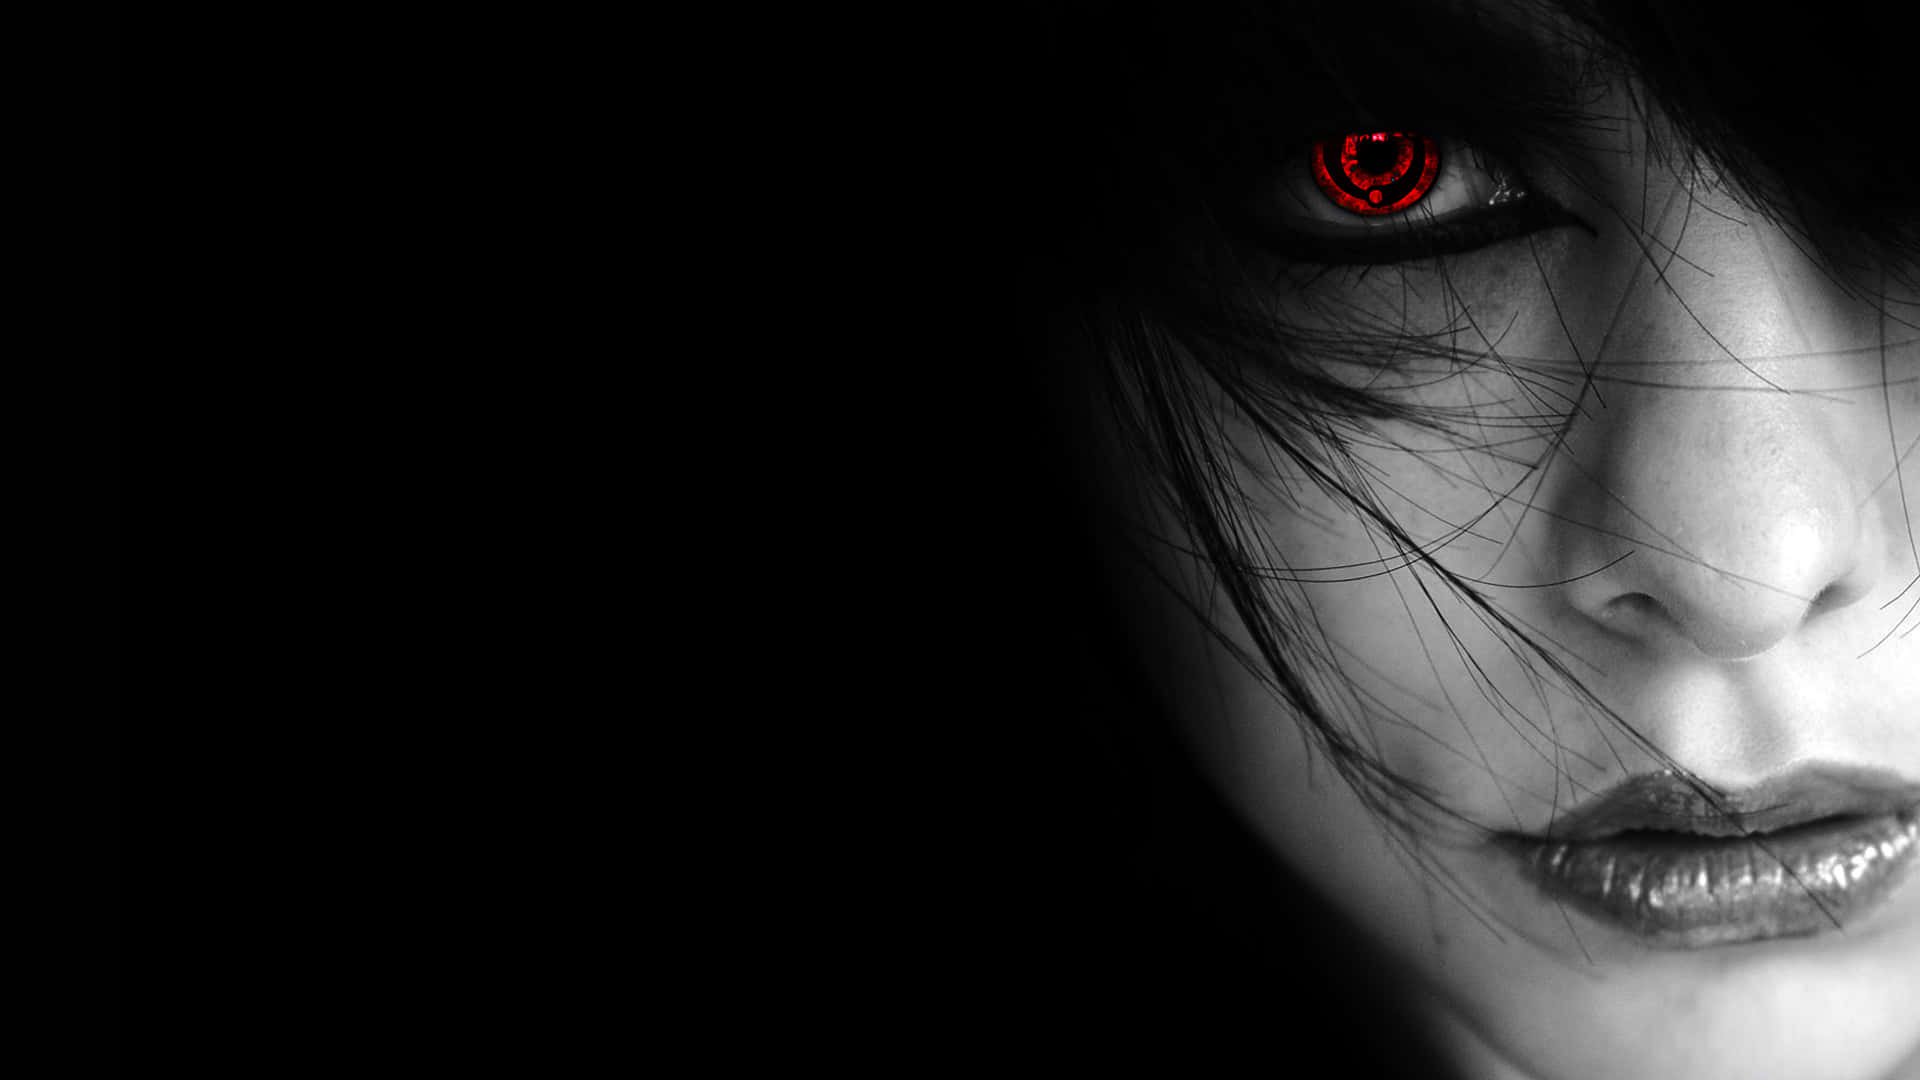 a woman with red eyes and black hair